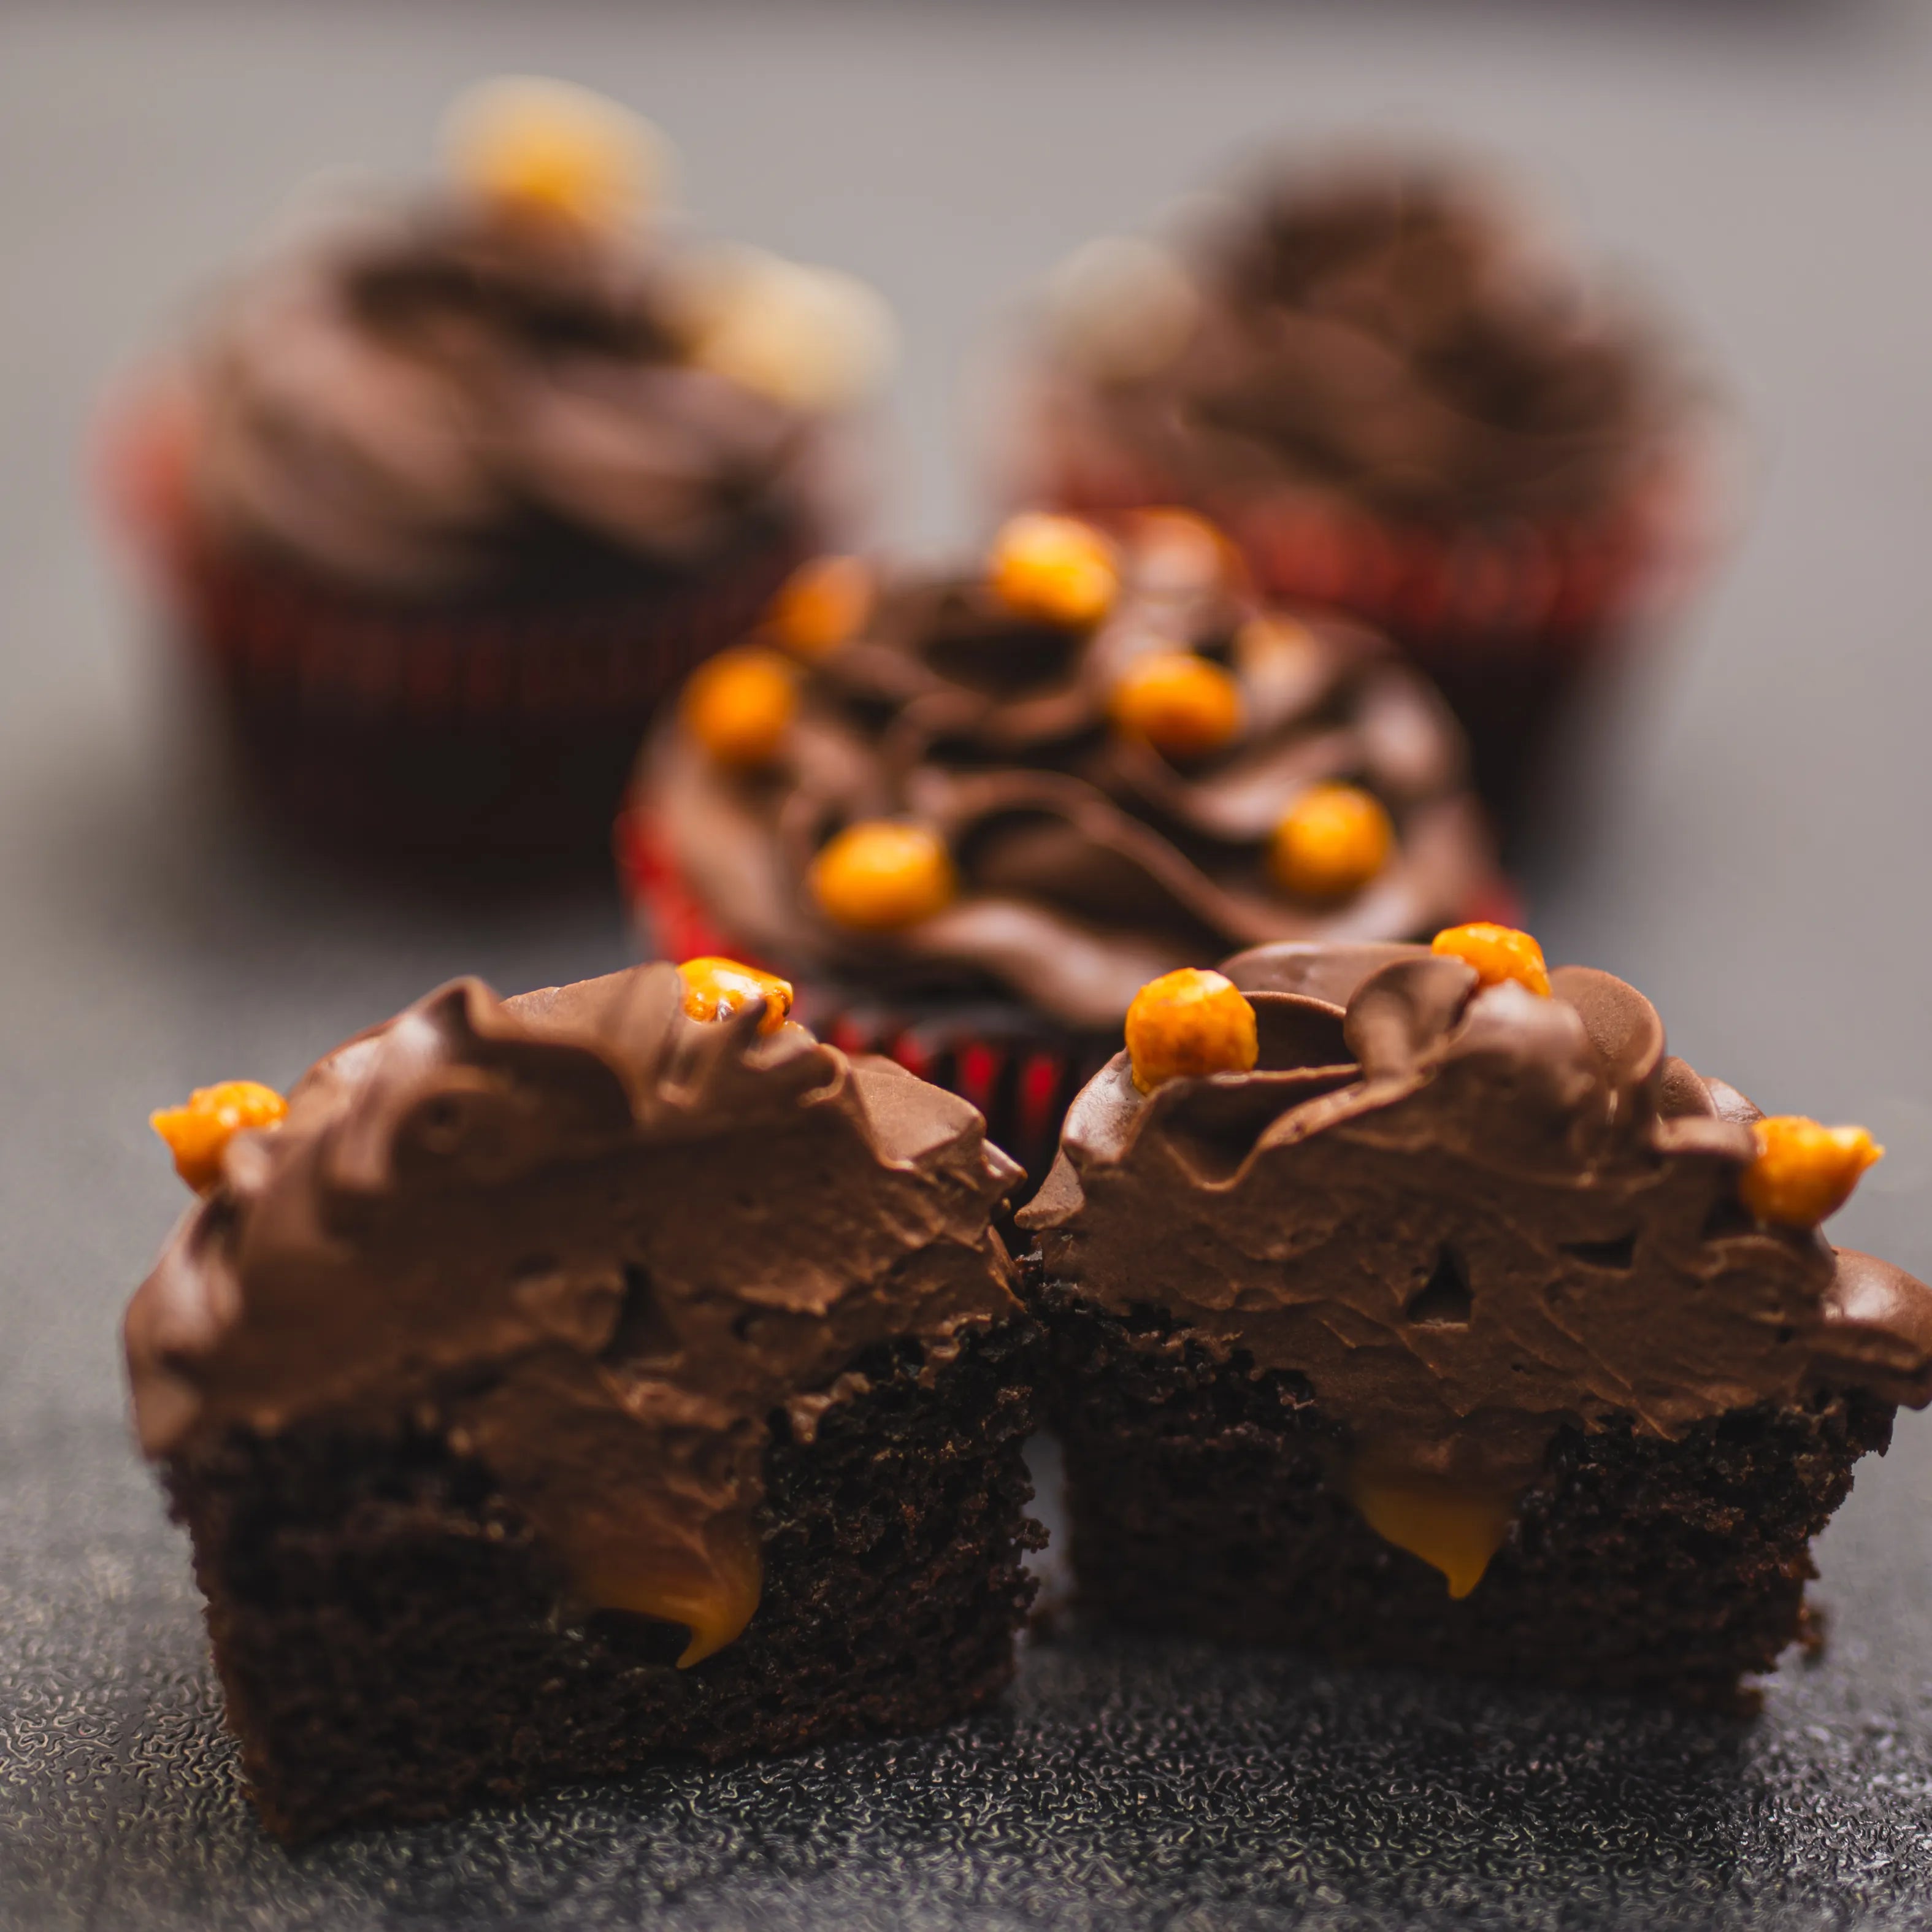 Moist chocolate cupcakes topped with salted caramel